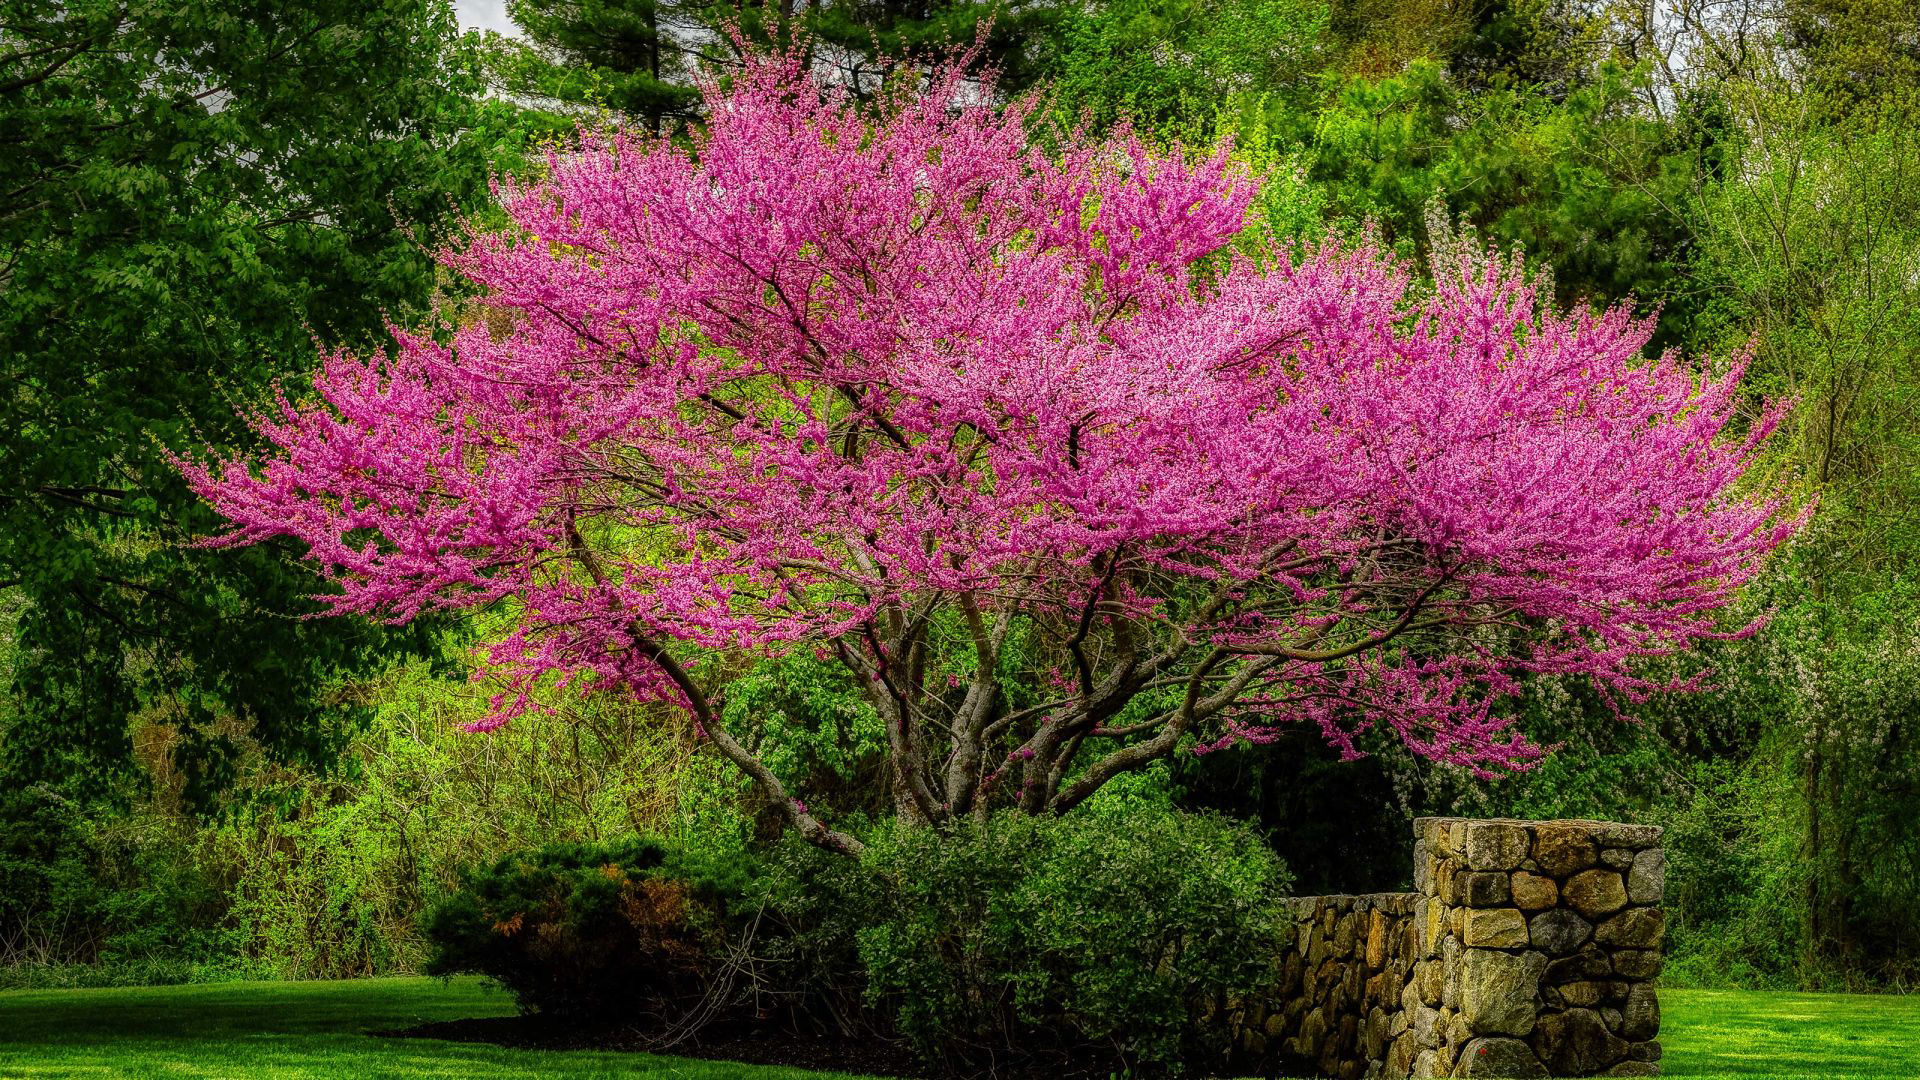 Best backyard trees: 10 choices for yards big or small